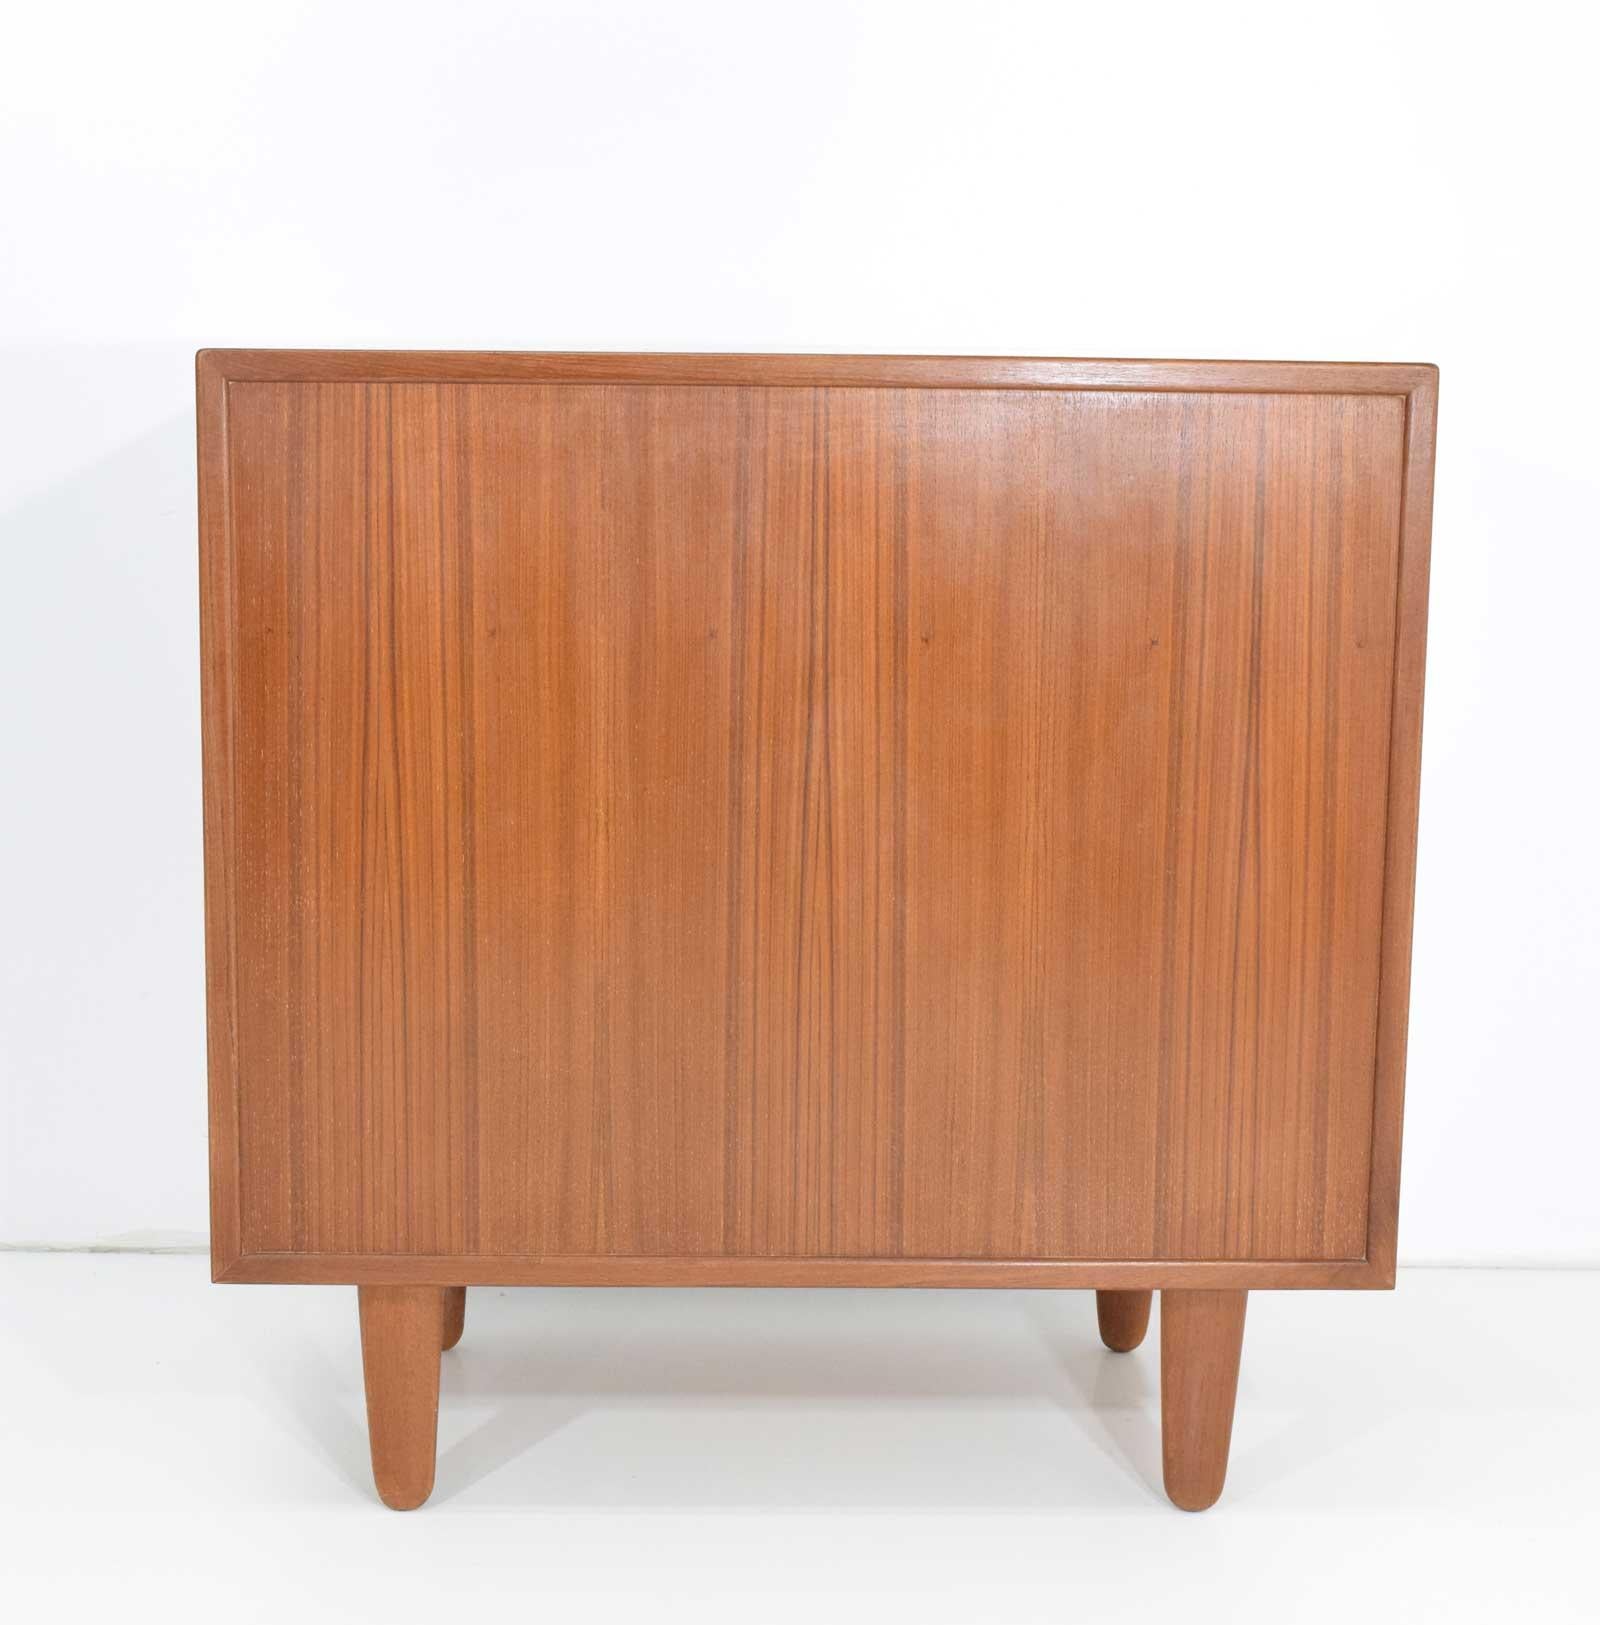 Beautiful chest of drawers from Denmark, dated 1960s. Chests has four drawers, large extended handles and a finished back.